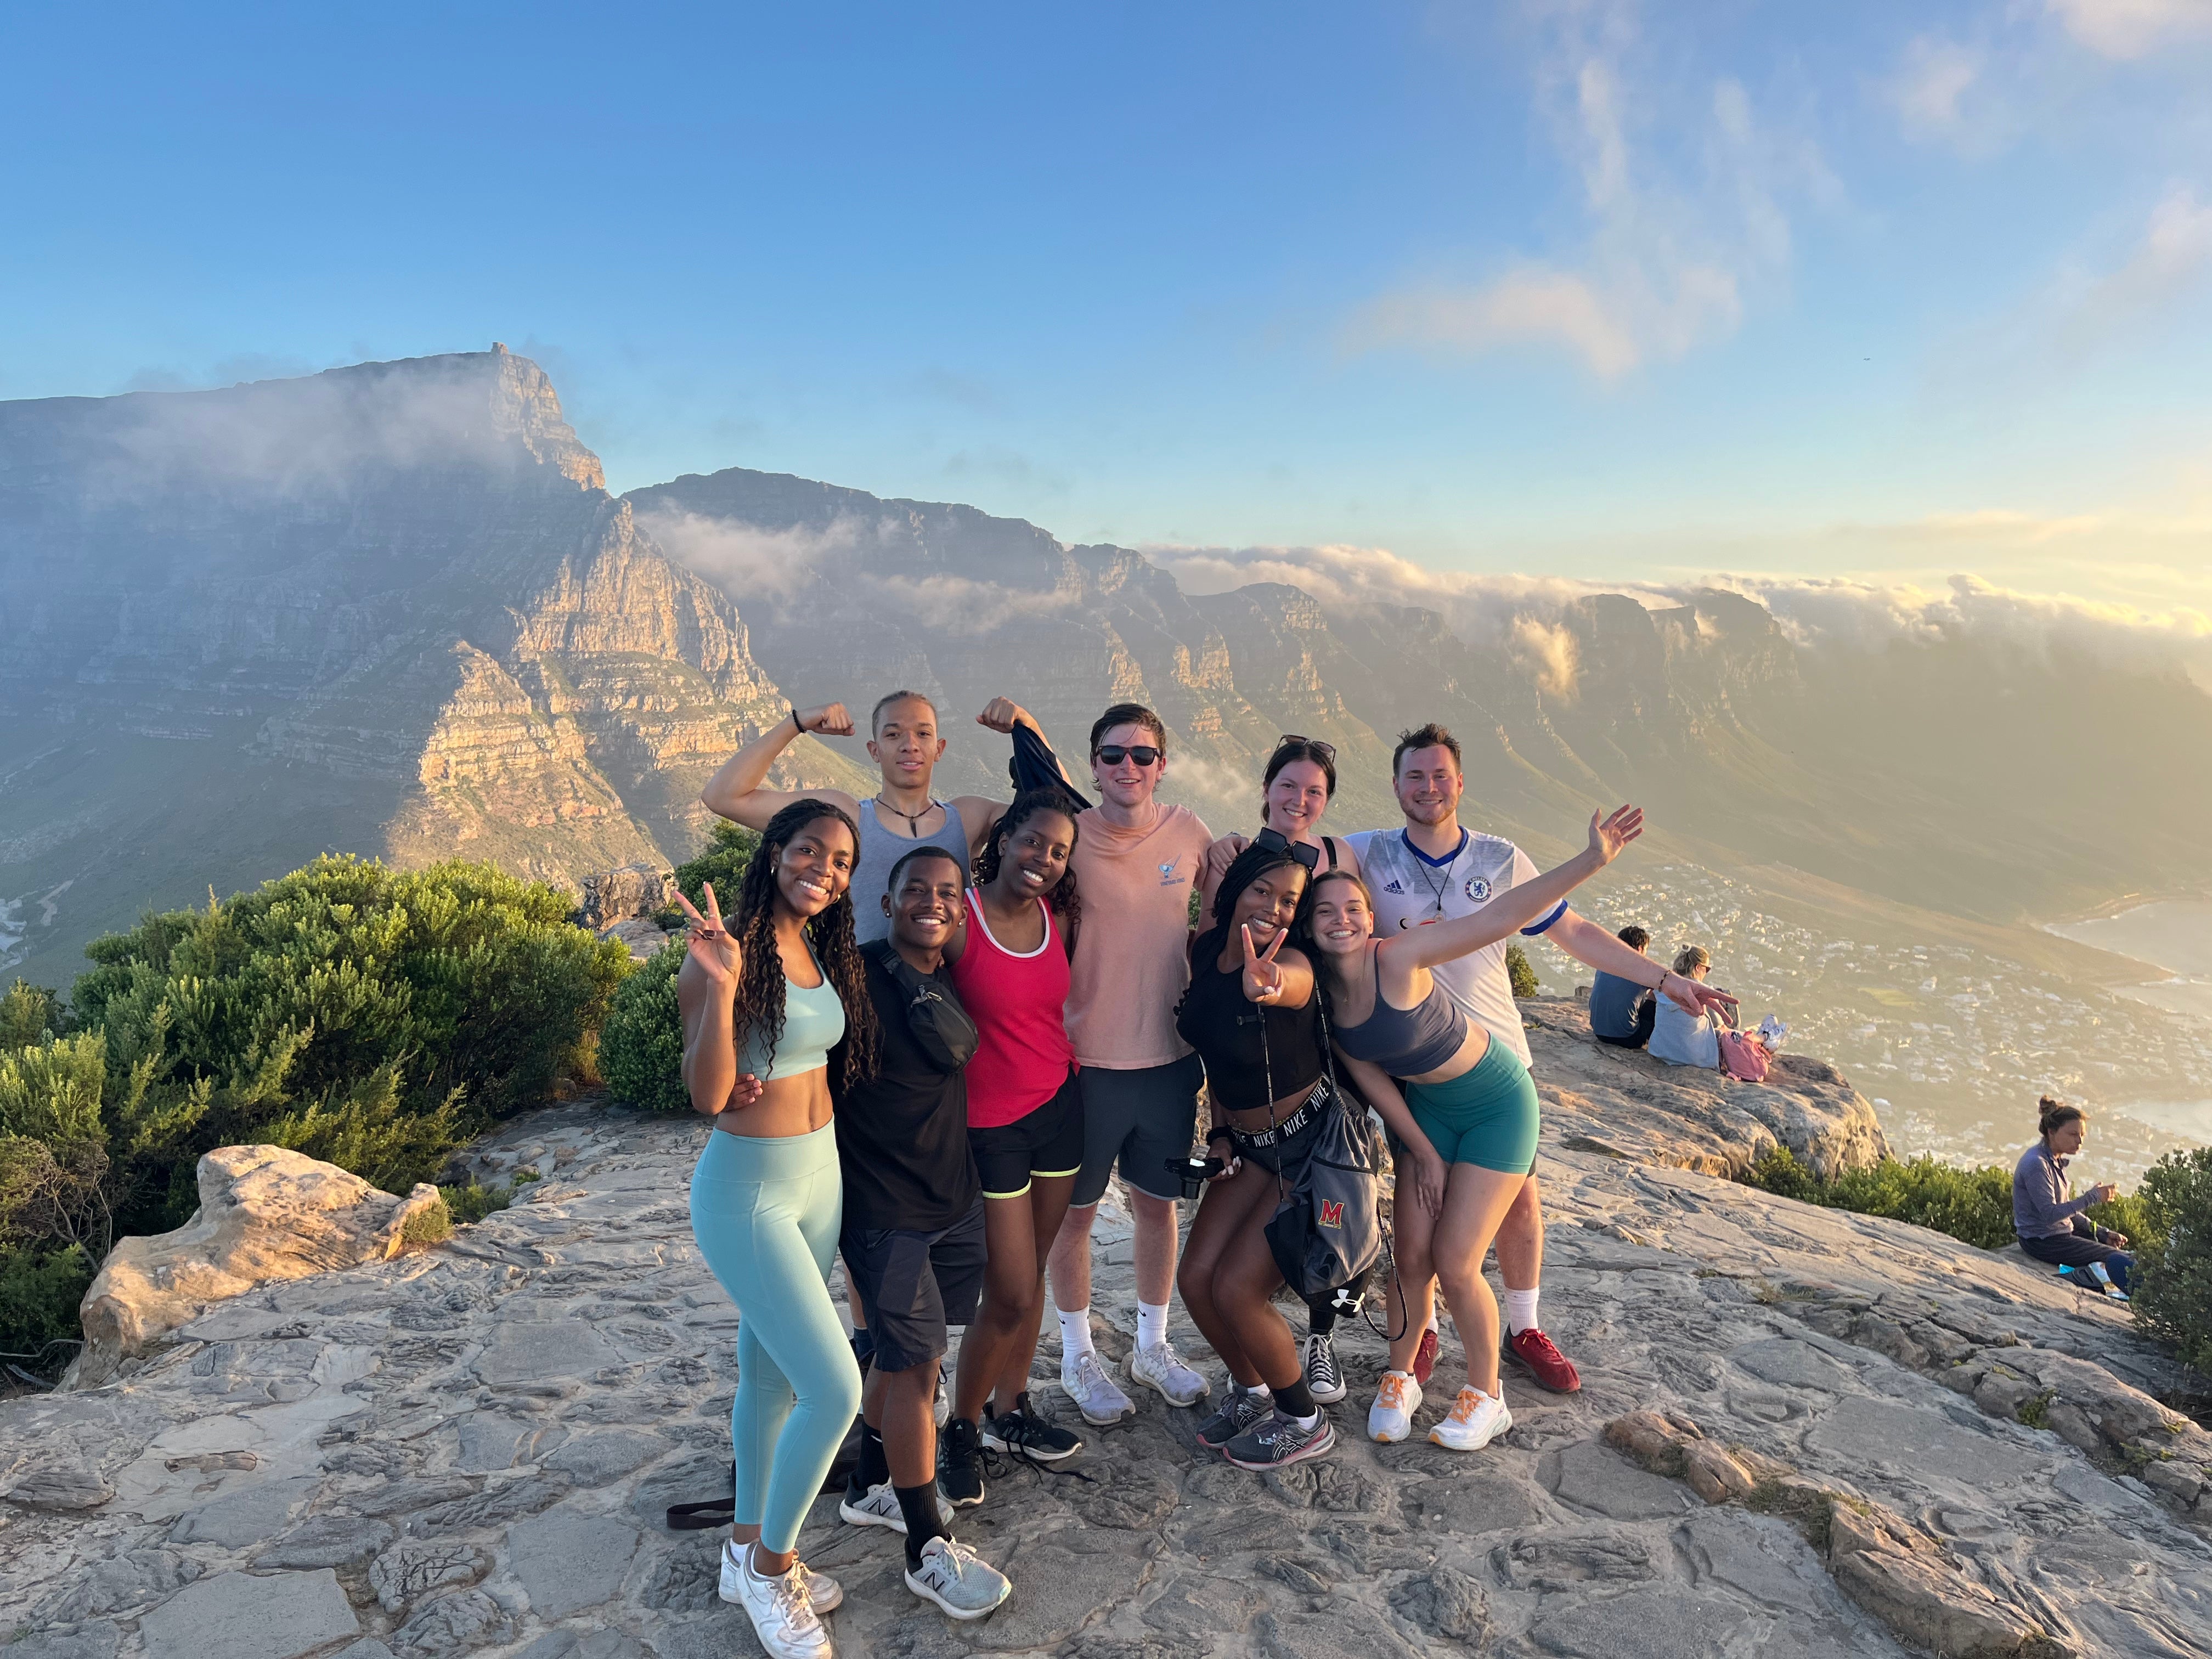 A group of UMD stand at the summit of Lion's Head Mountain in Cape Town, South Africa after hiking to the top.